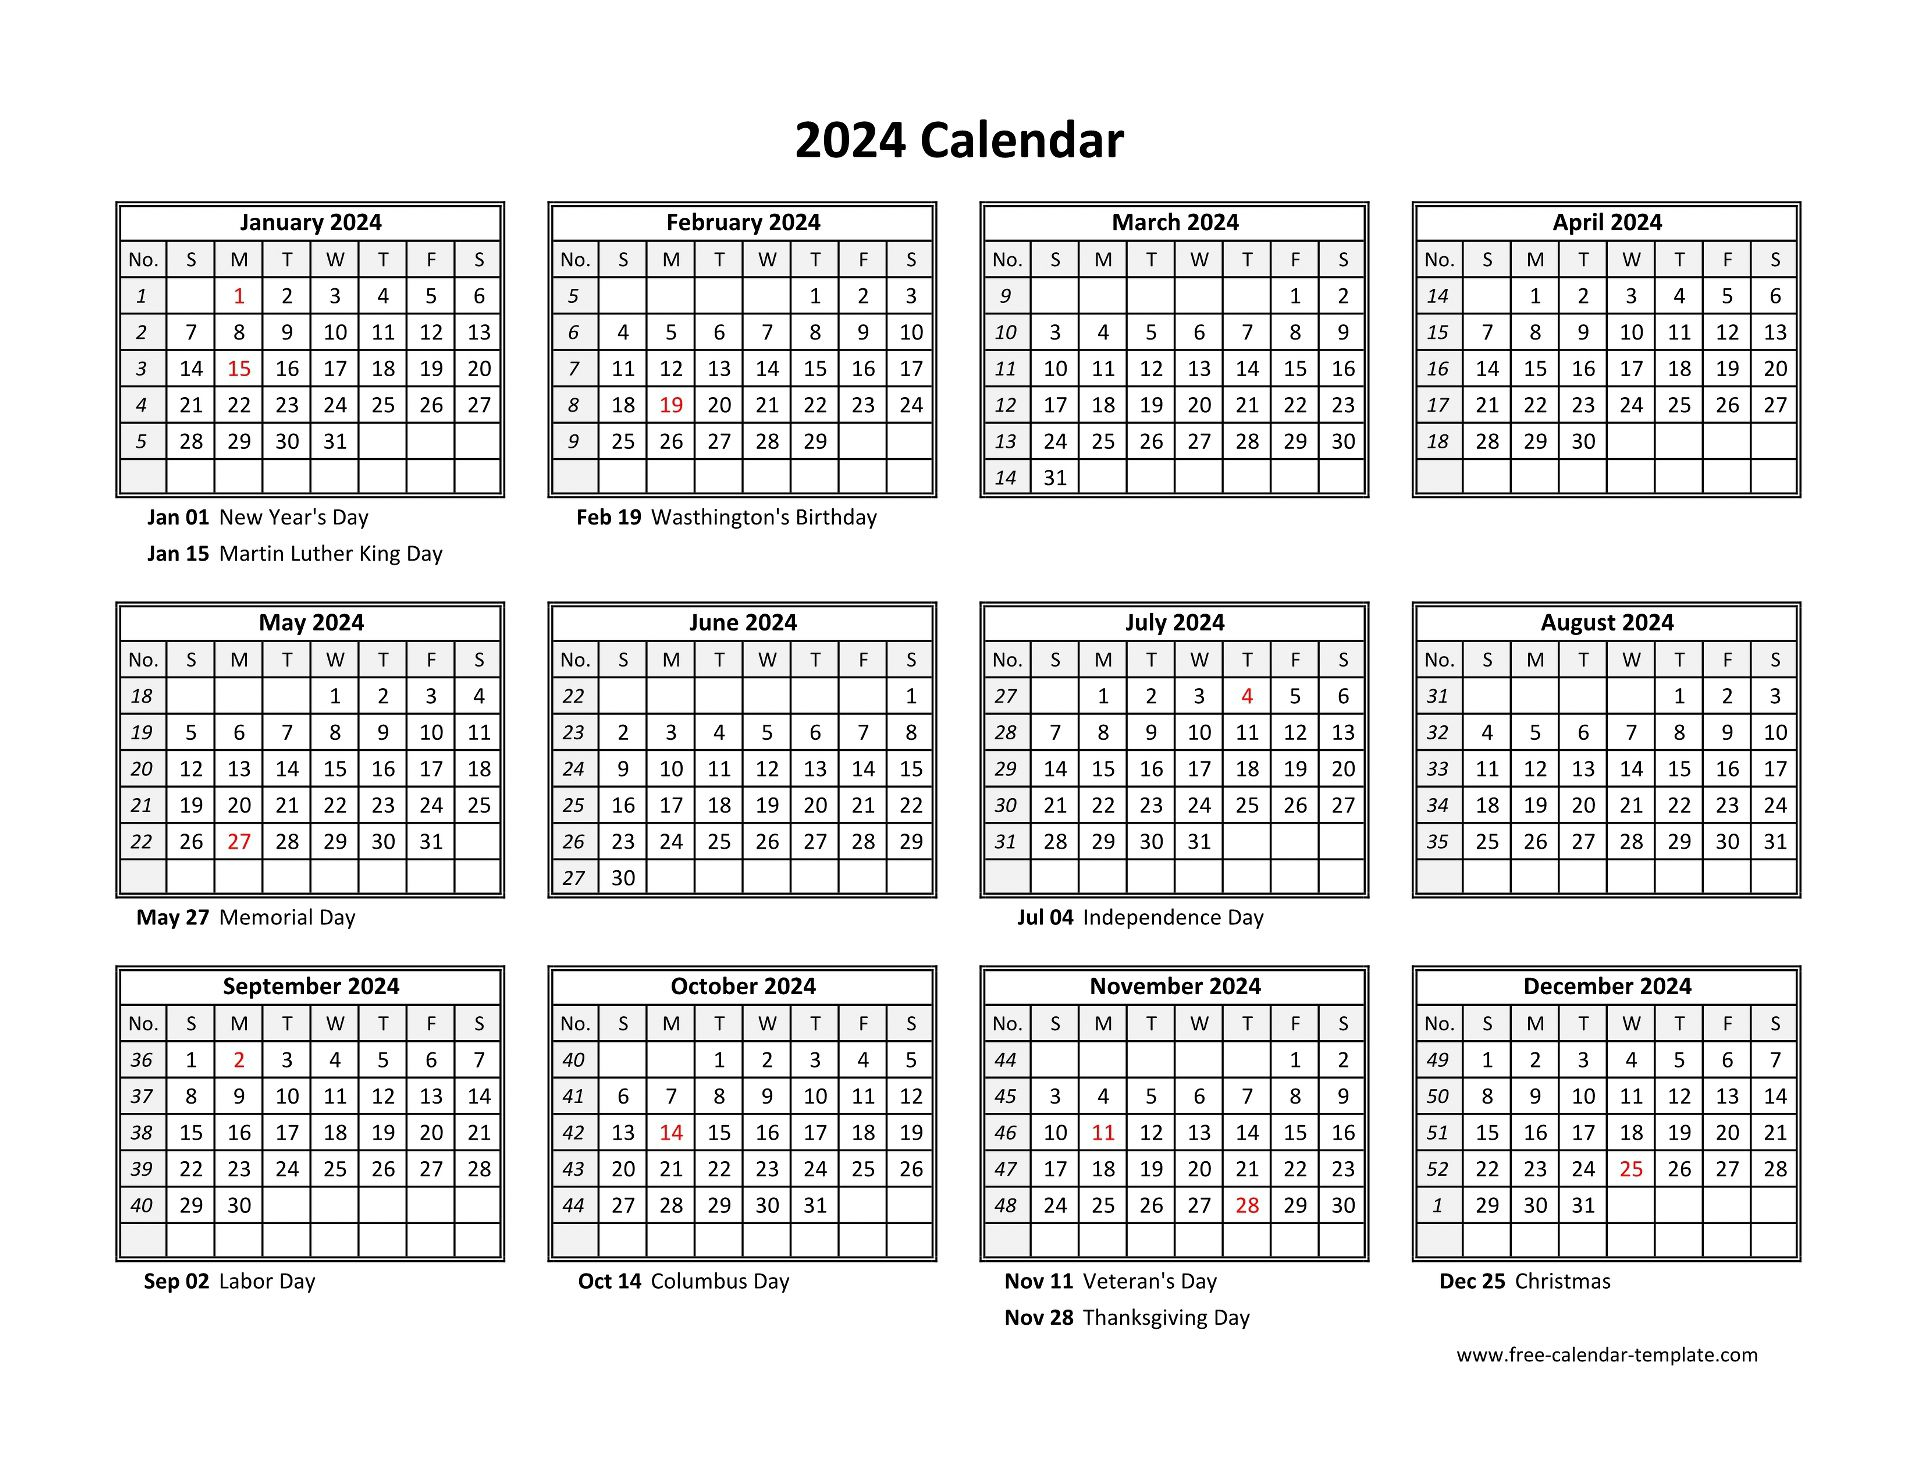 Yearly Calendar 2024 Printable With Federal Holidays | Free for 2024 Printable Calendar 12 Months